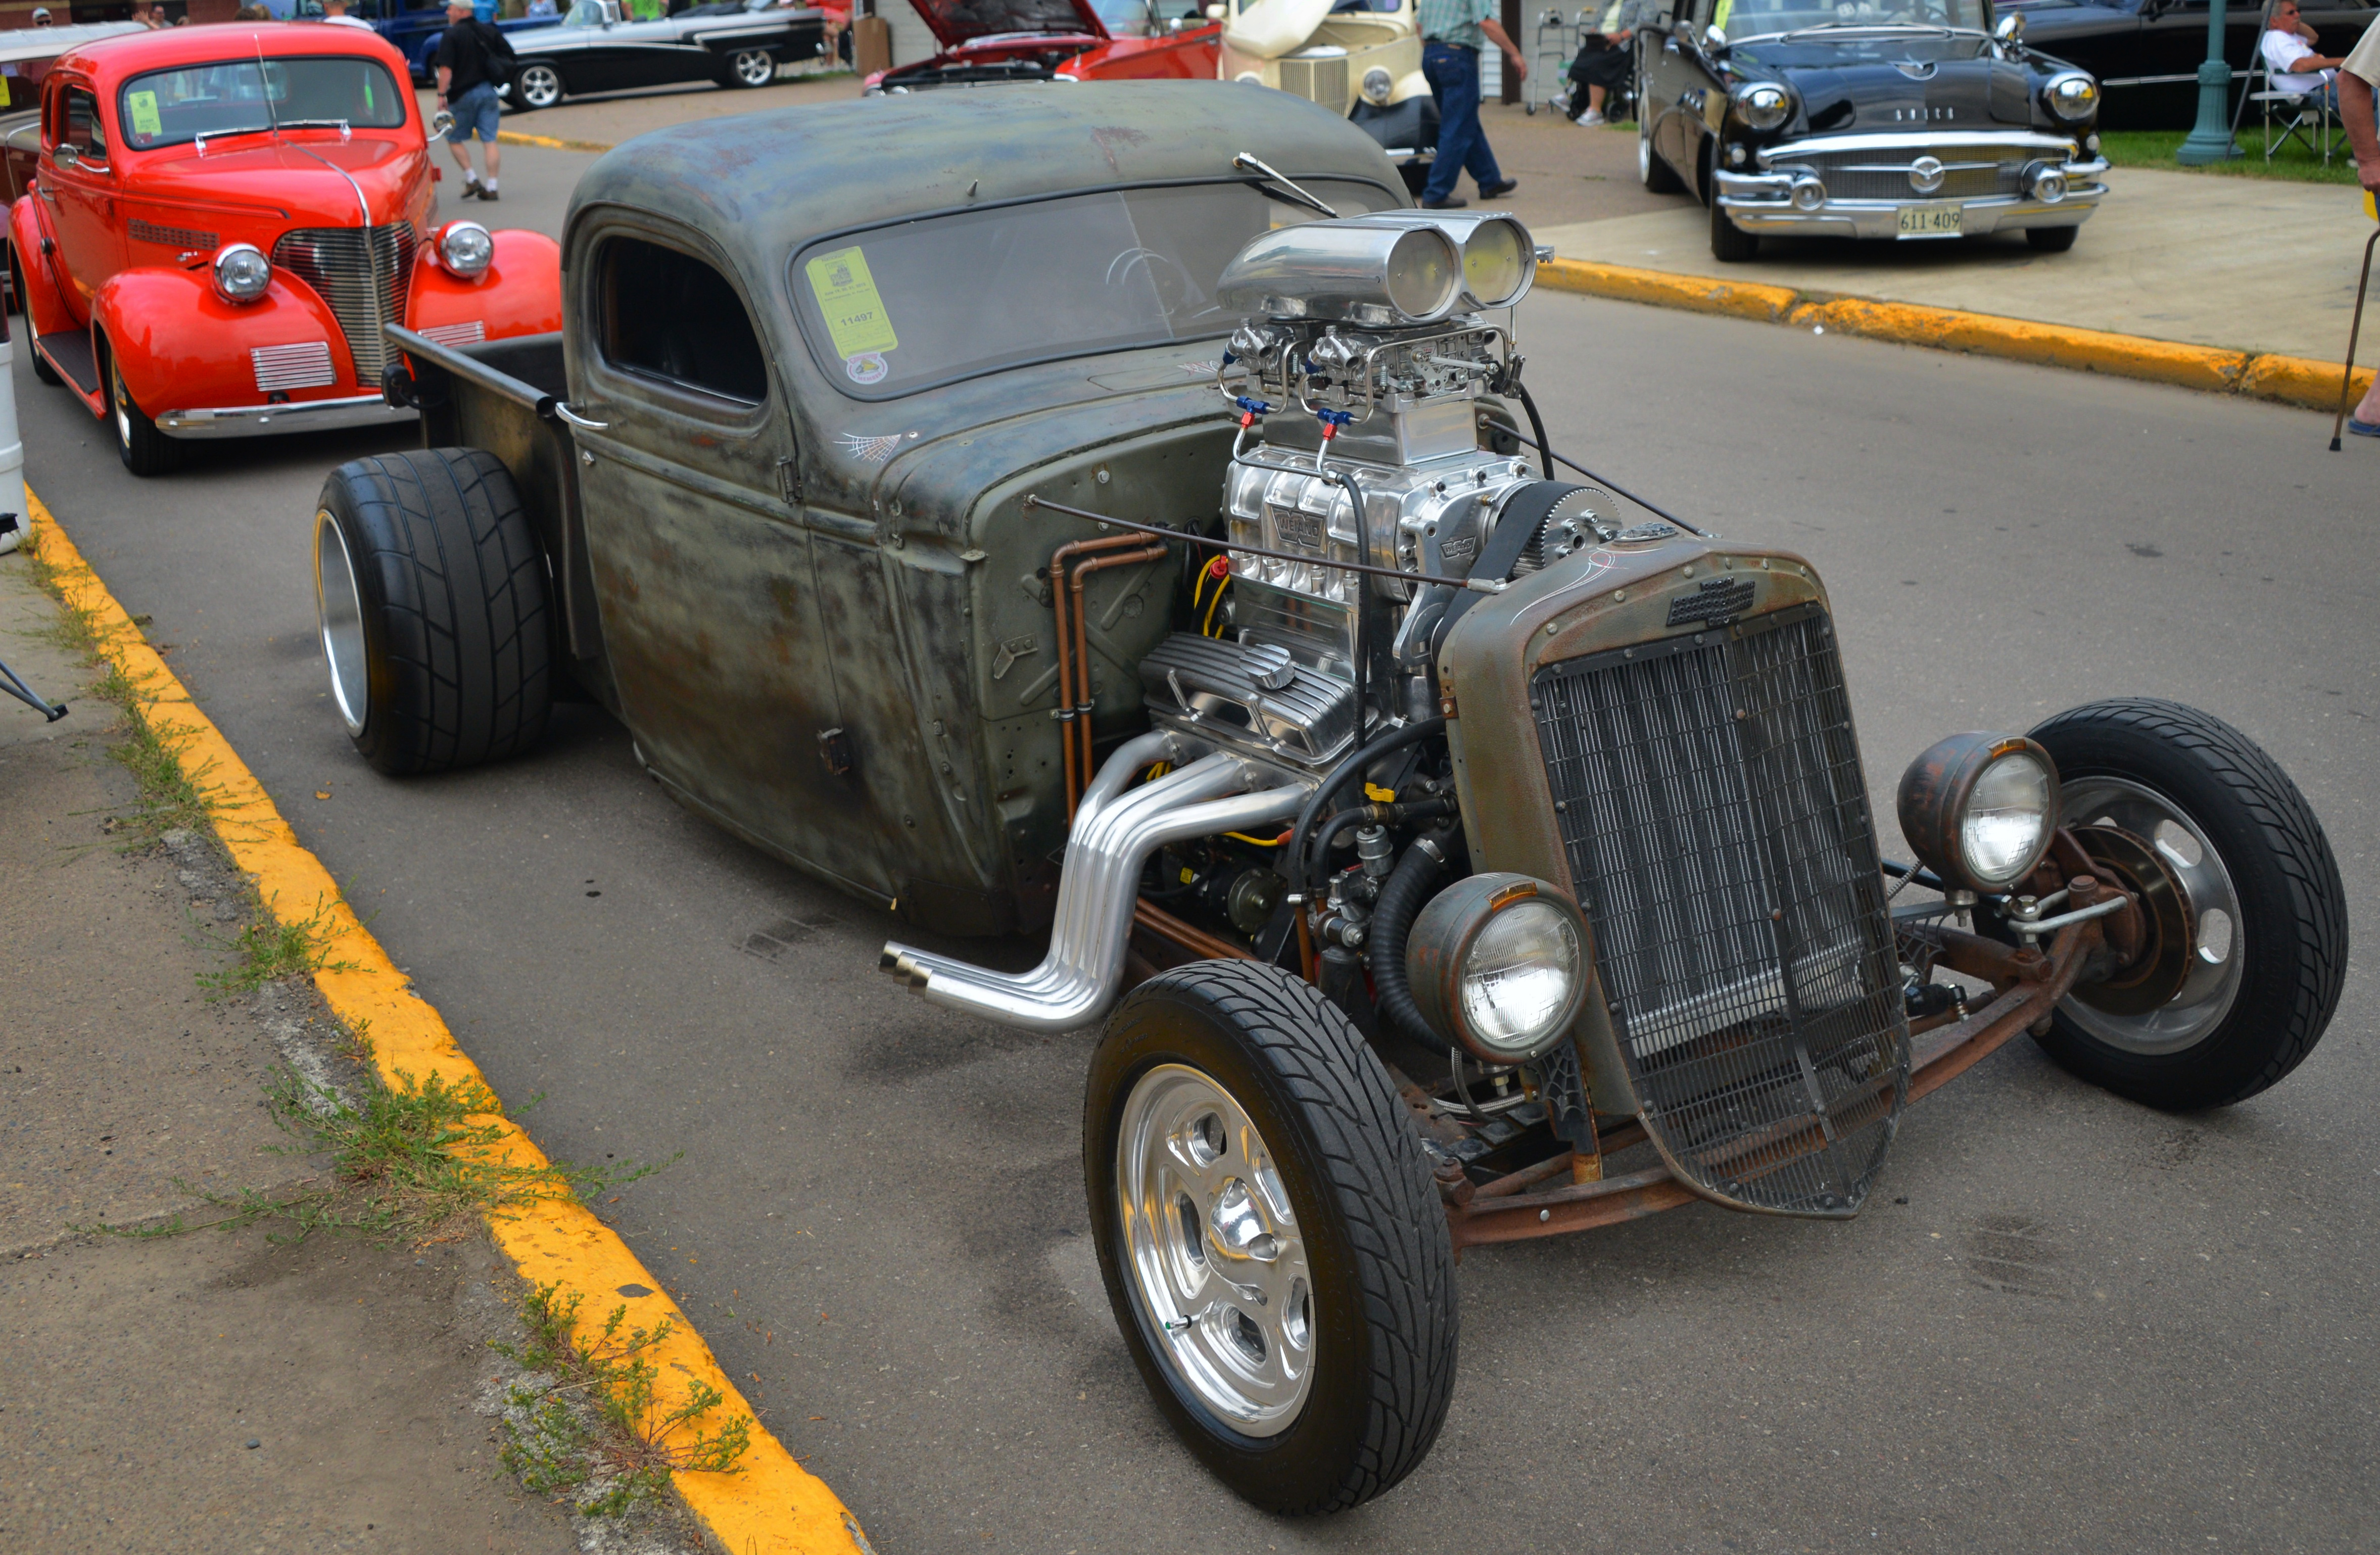 Hot rod with supercharger